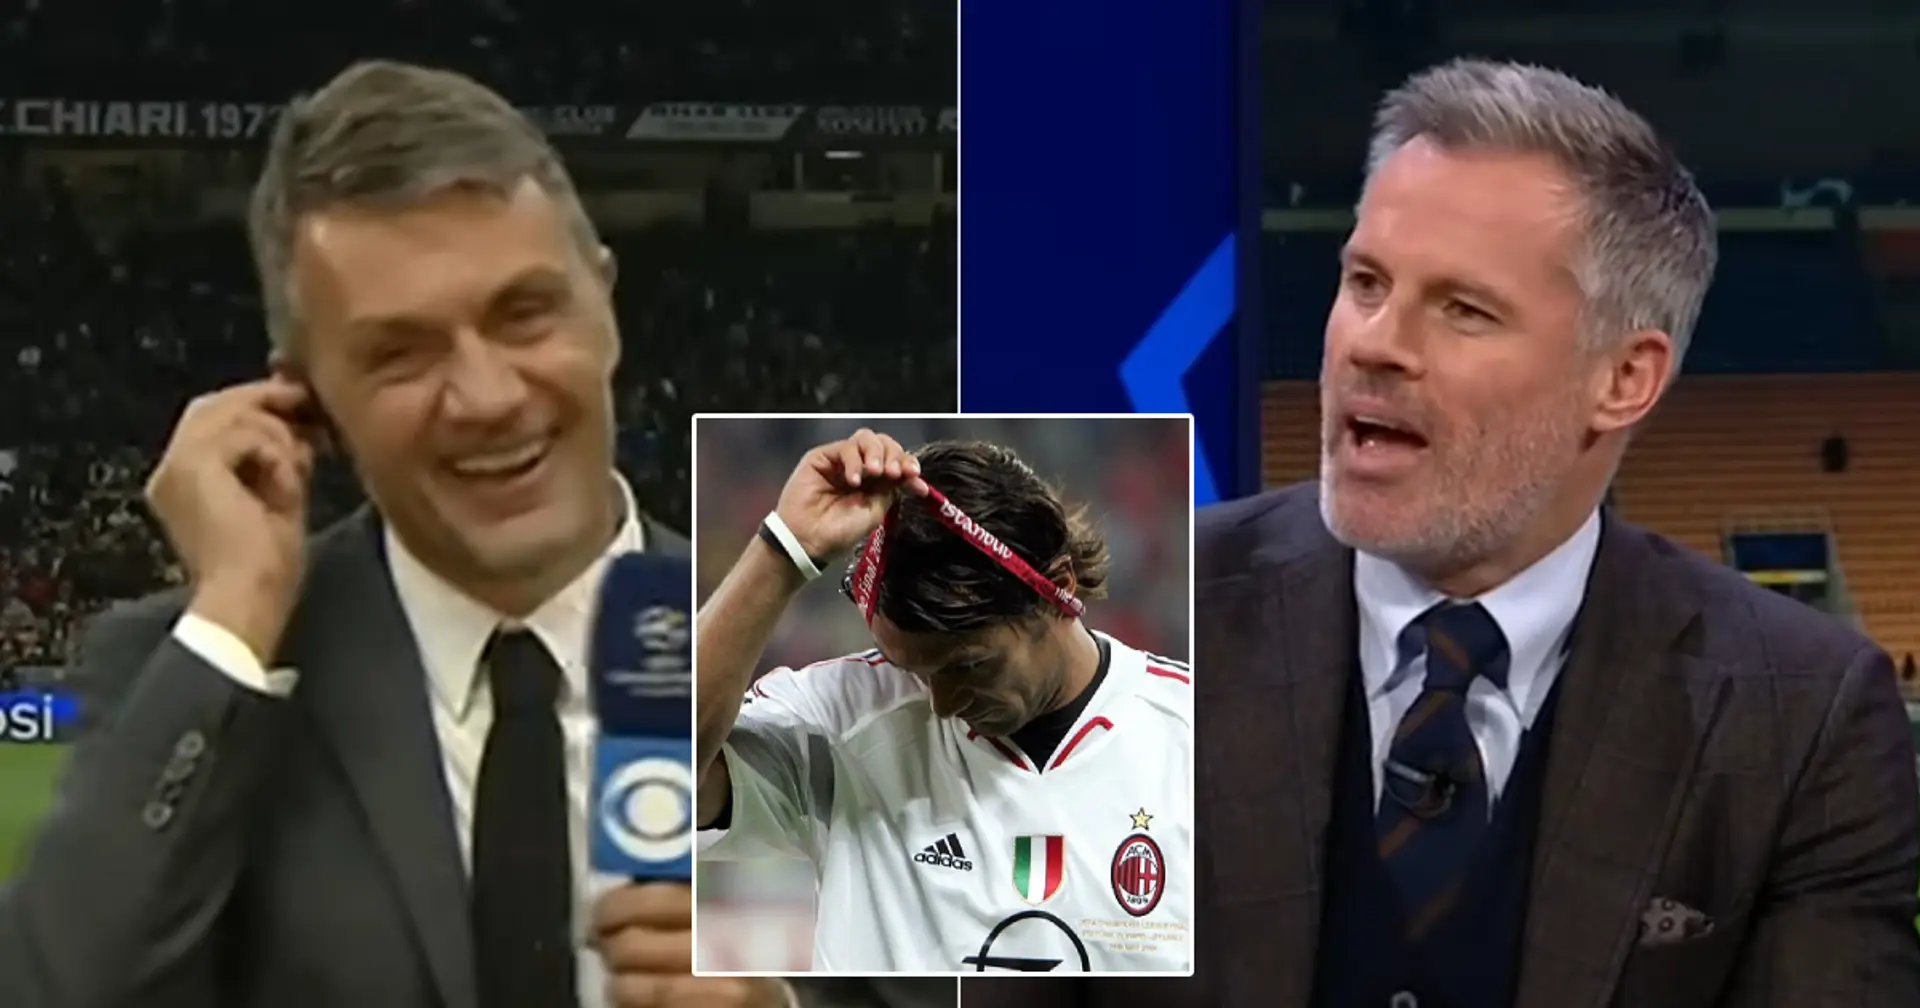 'You don’t want it back, no?': Carragher reveals he has Paolo Maldini's shirt from Istanbul final